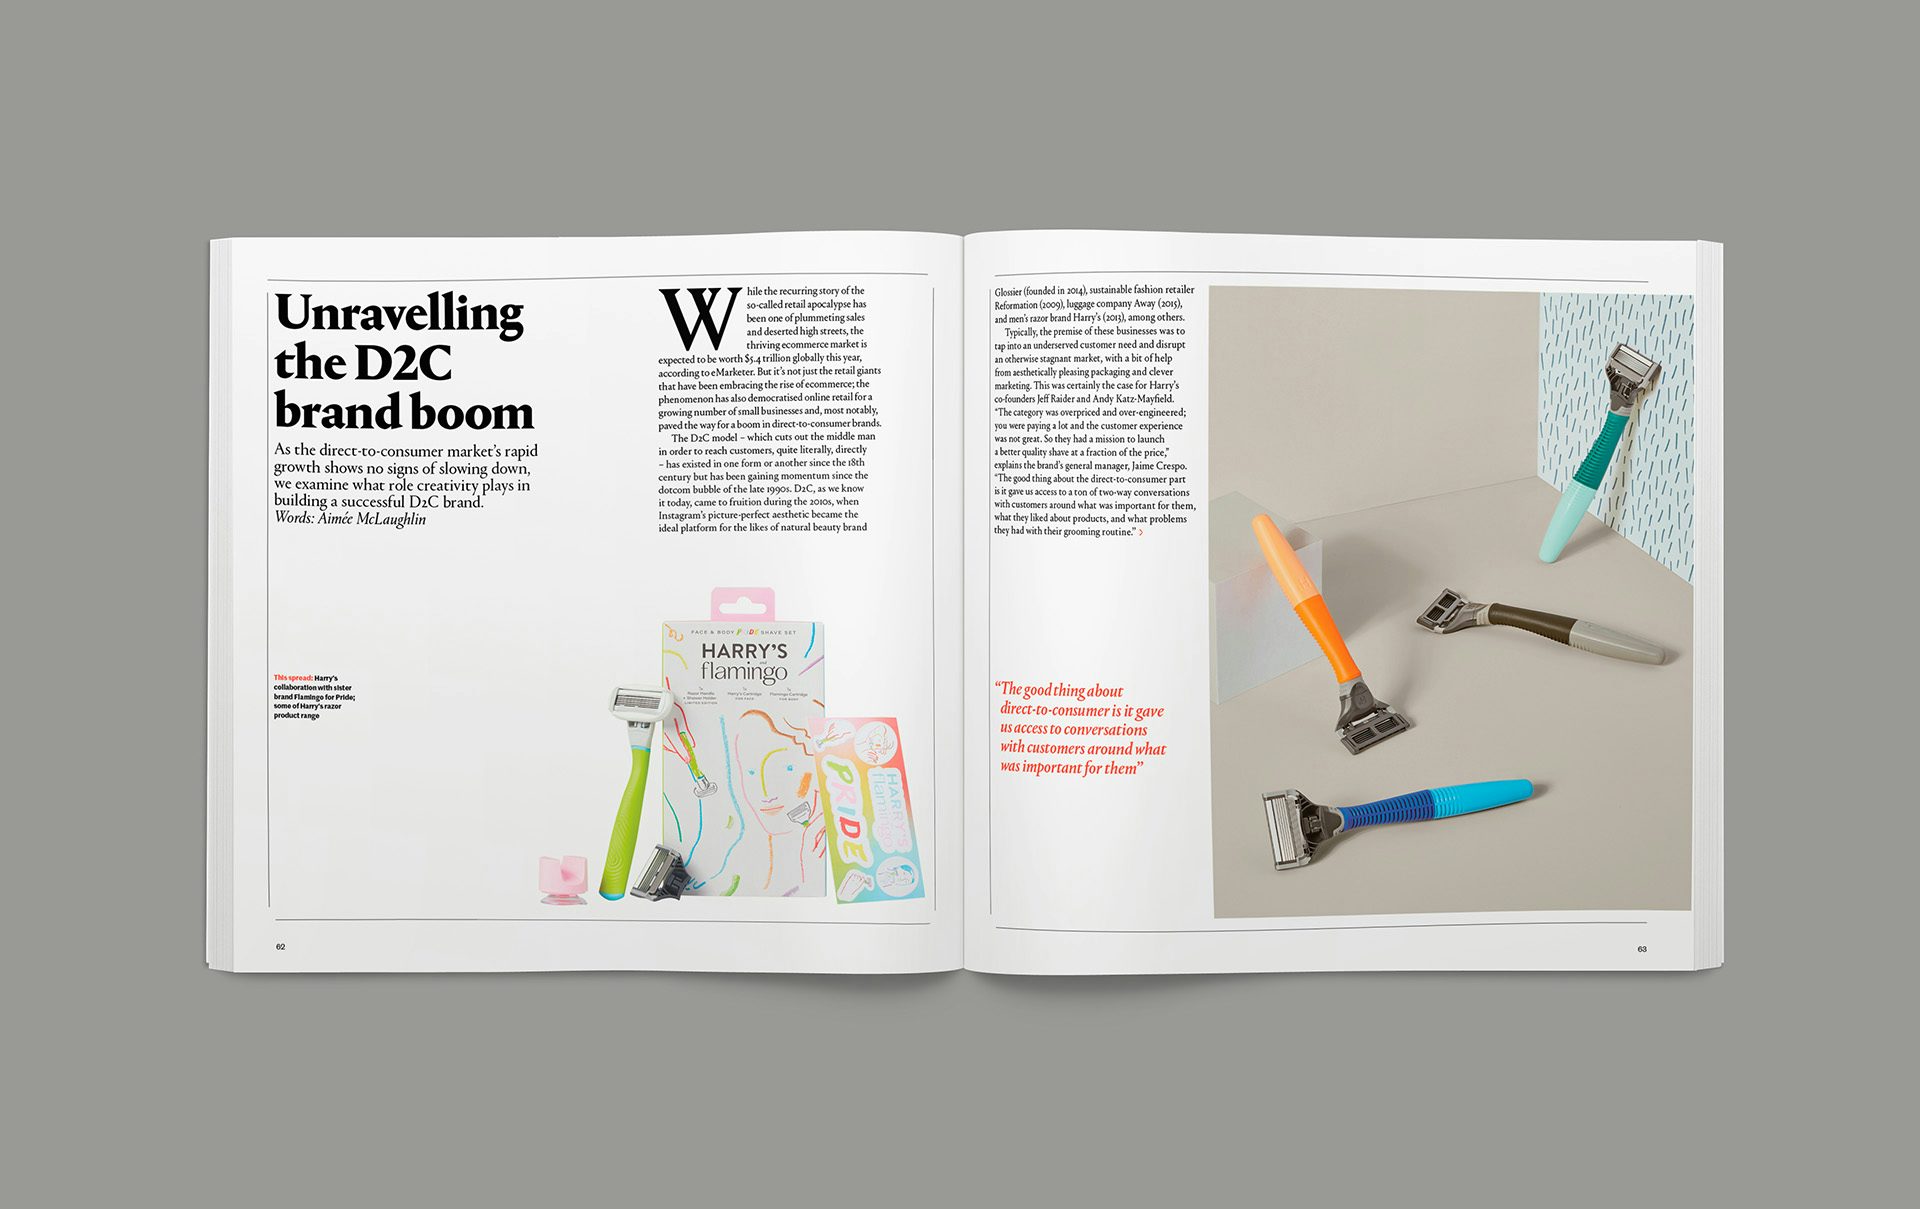 Photograph of the D2C magazine spread in the Creative Review Brands issue